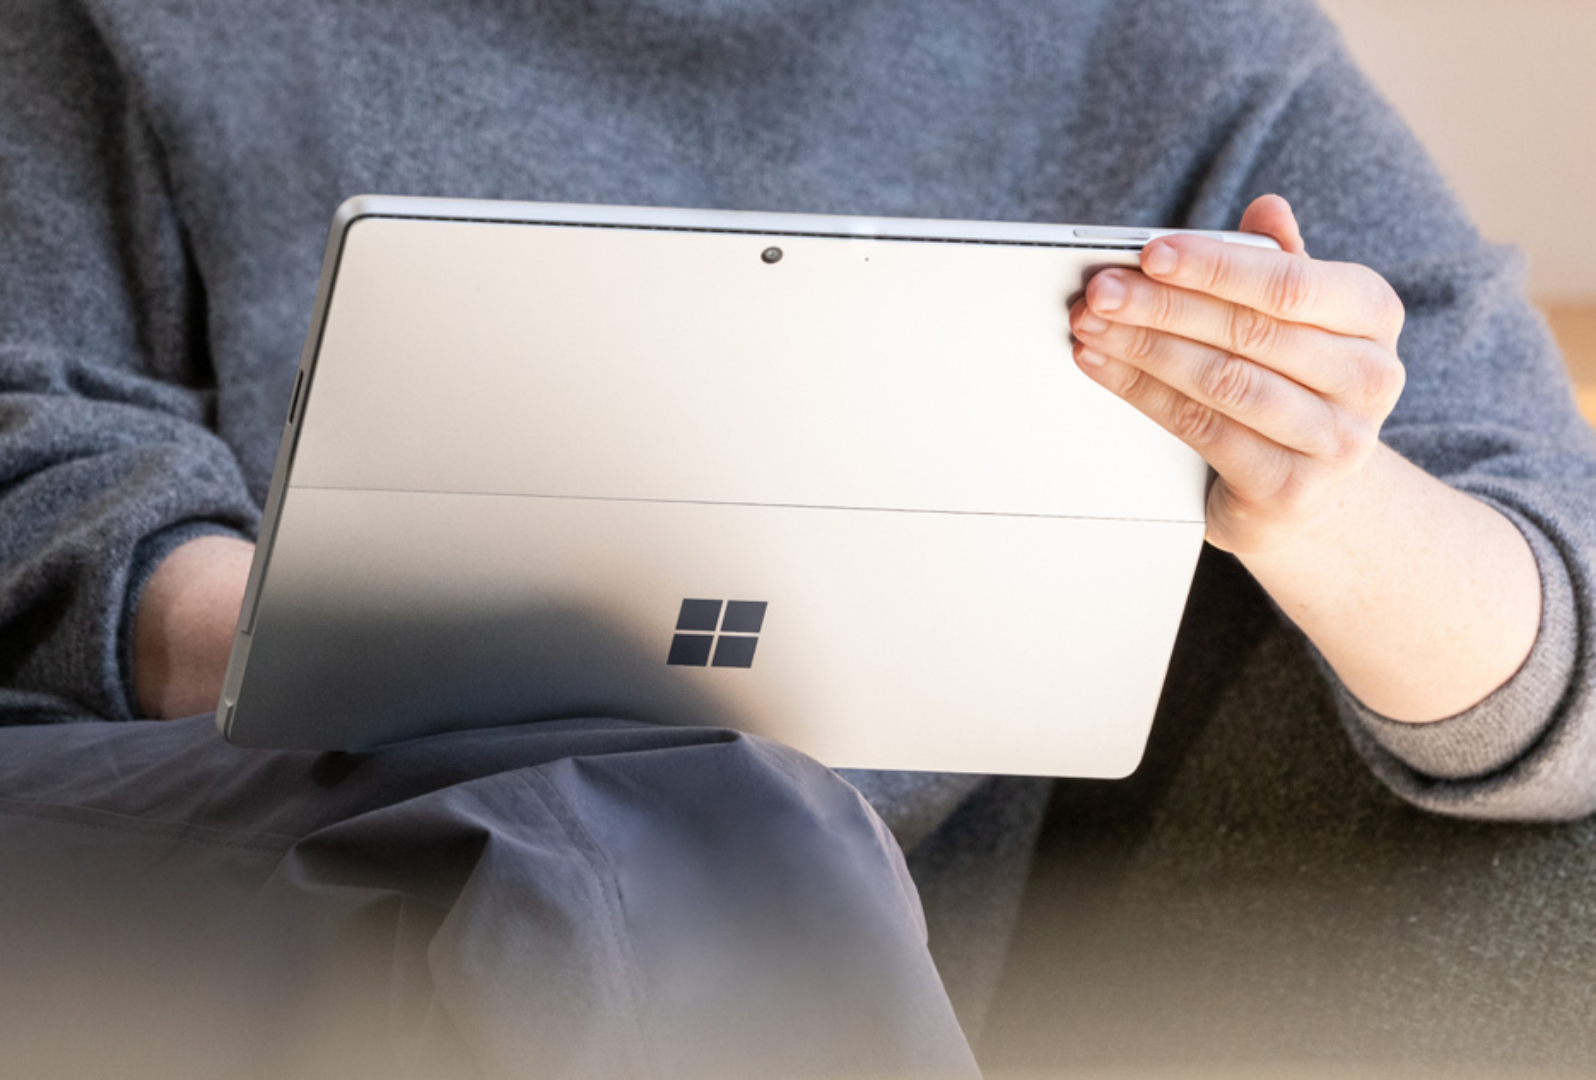 Close up of person holding a Surface device on their lap